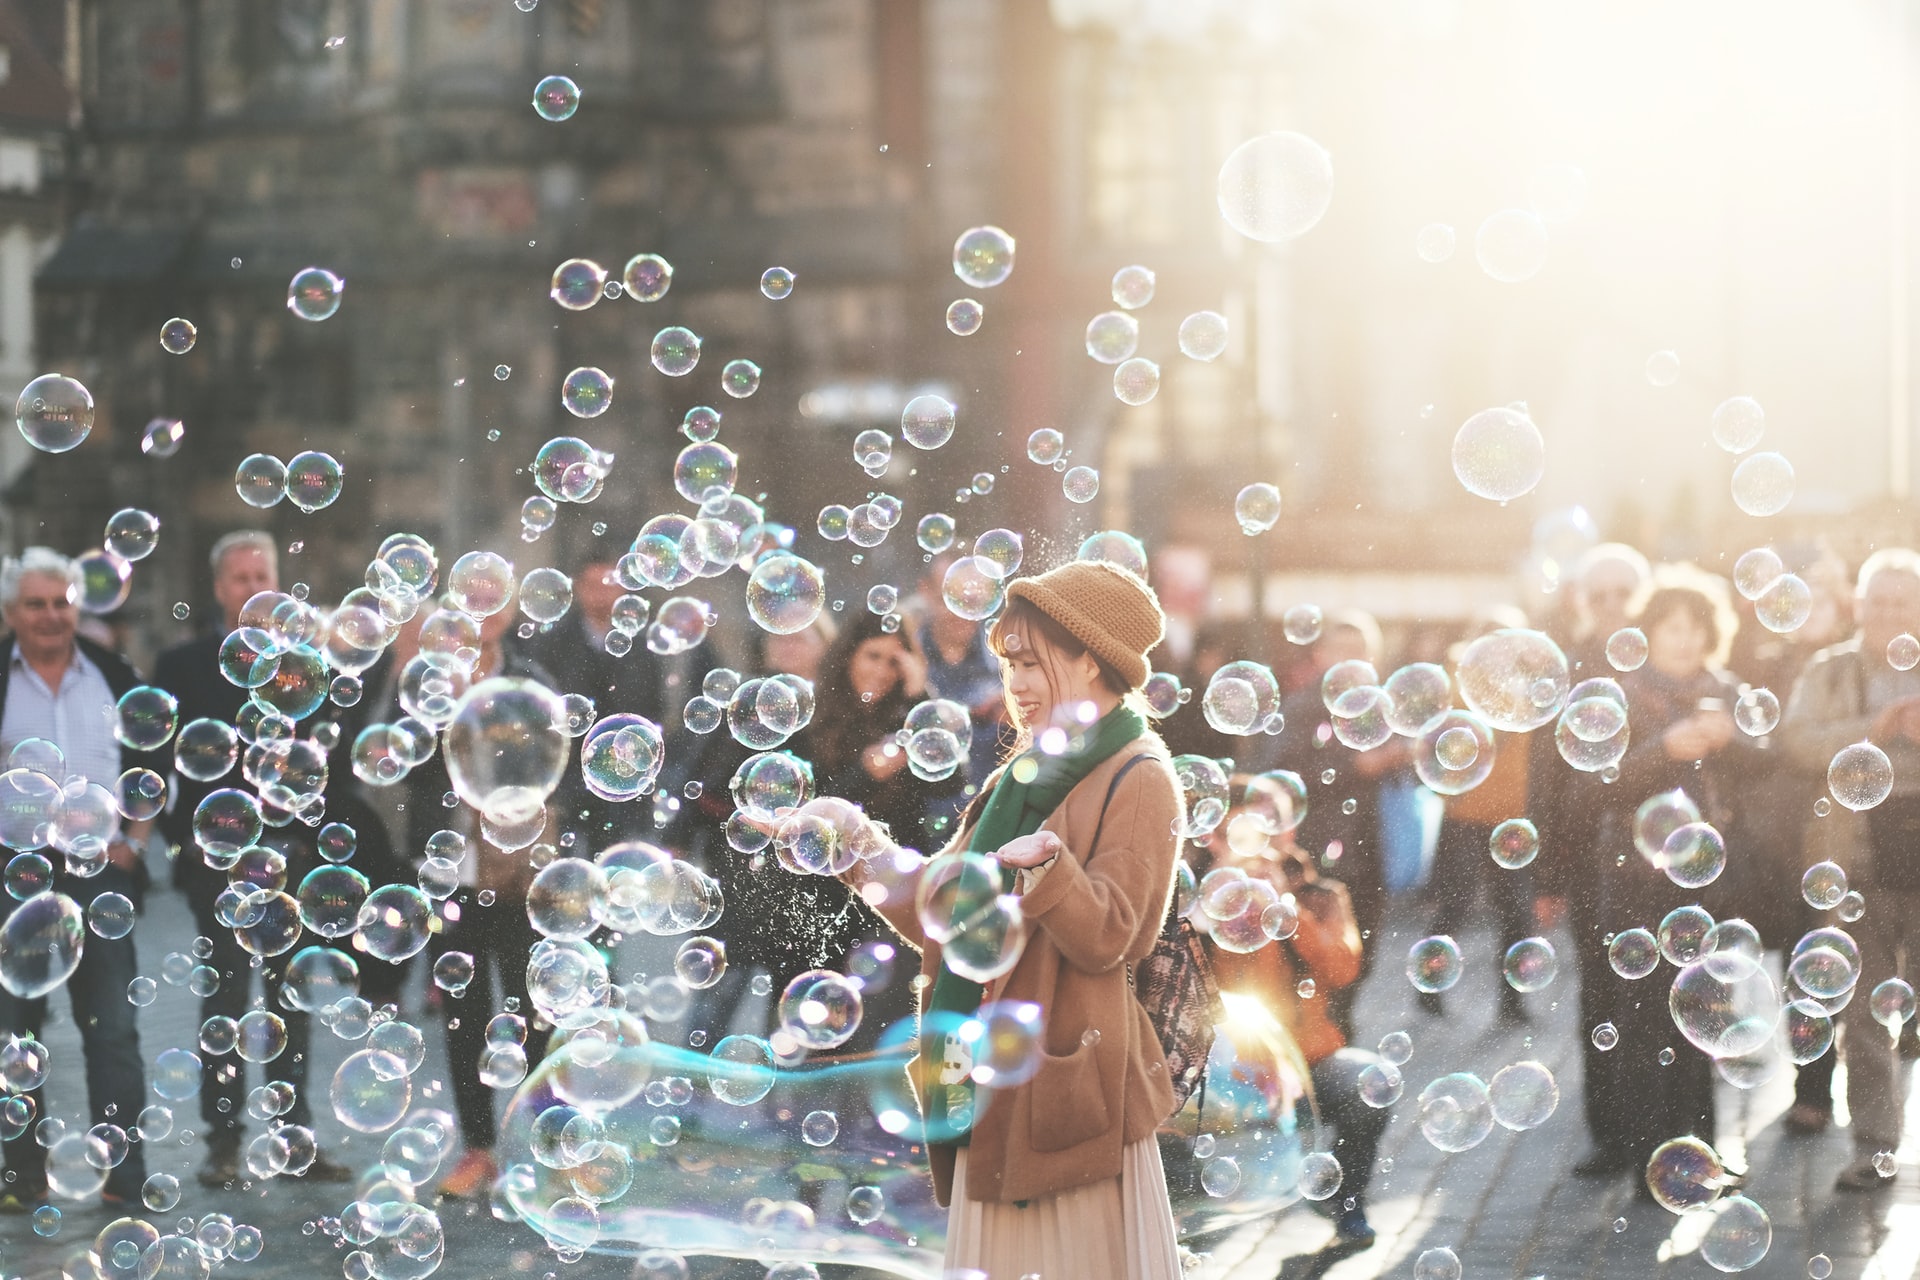 capture the moment photograph, person stands happily among lots of bubbles, onlookers in urban background